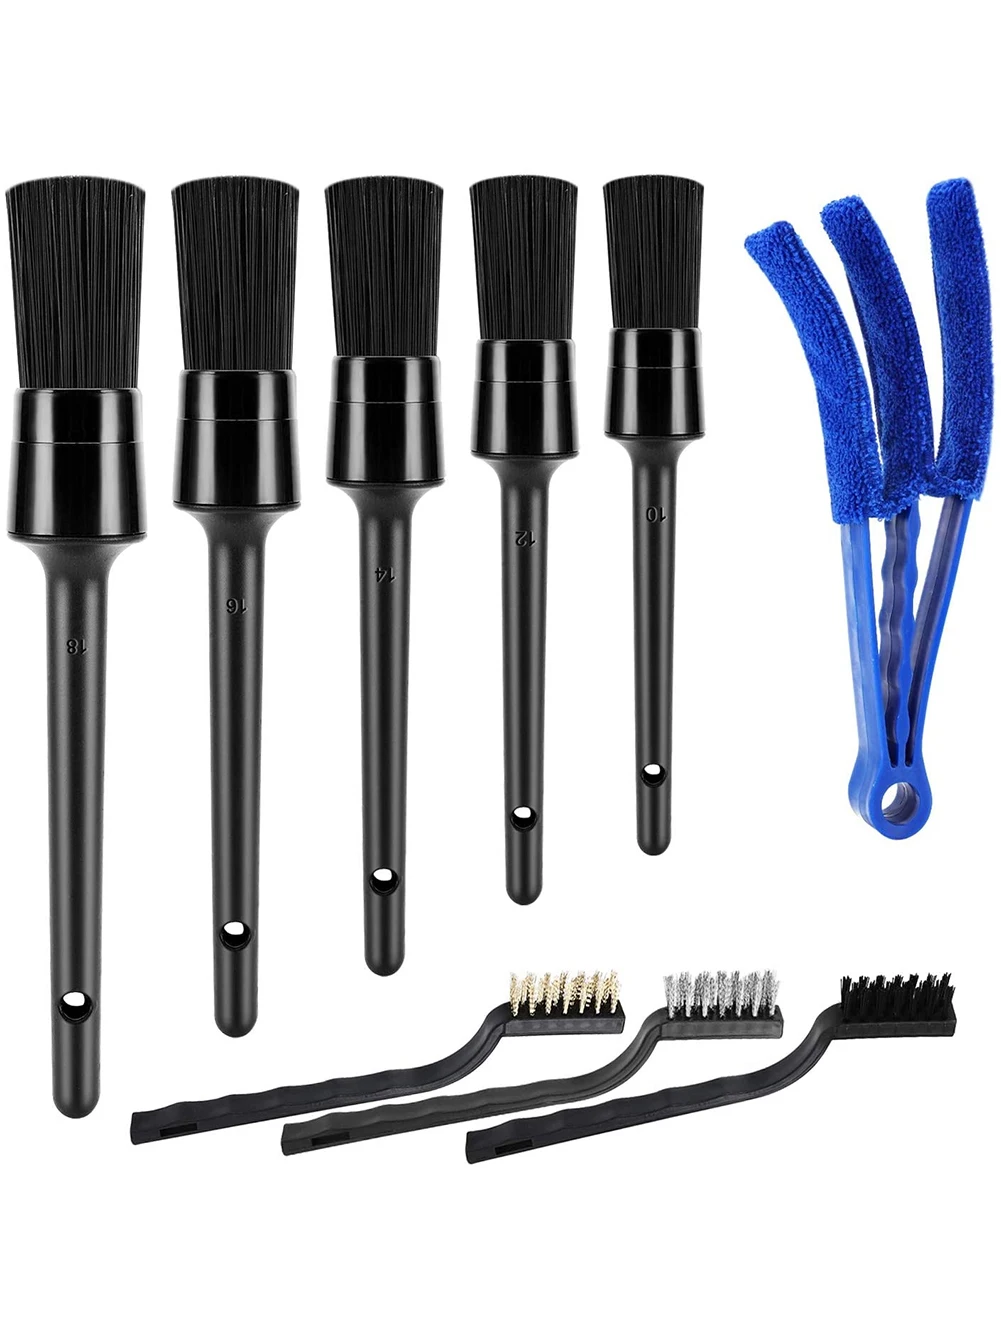 

9Pcs Detailing Brush Set Car Cleaning Brushes Dashboard Brush For Car Leather Air Vents Rim Cleaning Dirt Dust Clean Tools